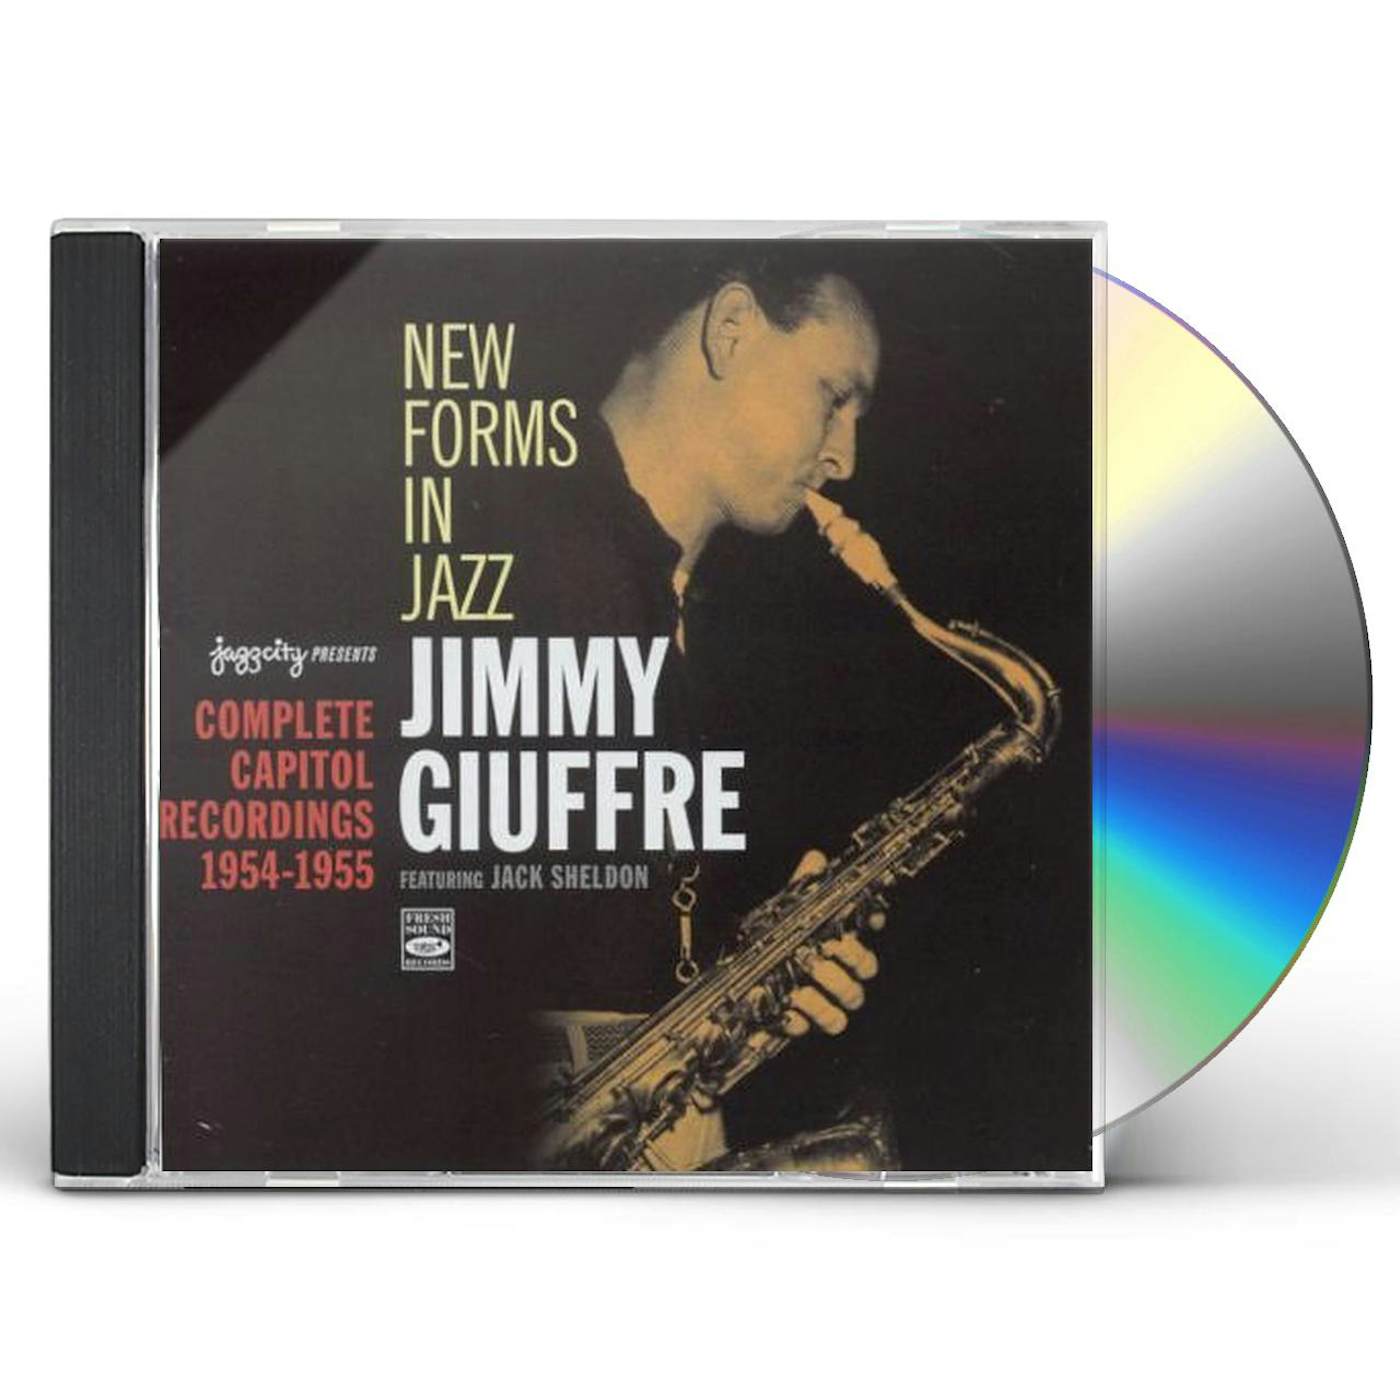 Jimmy Giuffre NEW FORMS IN JAZZ: COMPLETE CAPITOL 1954-1955 CD